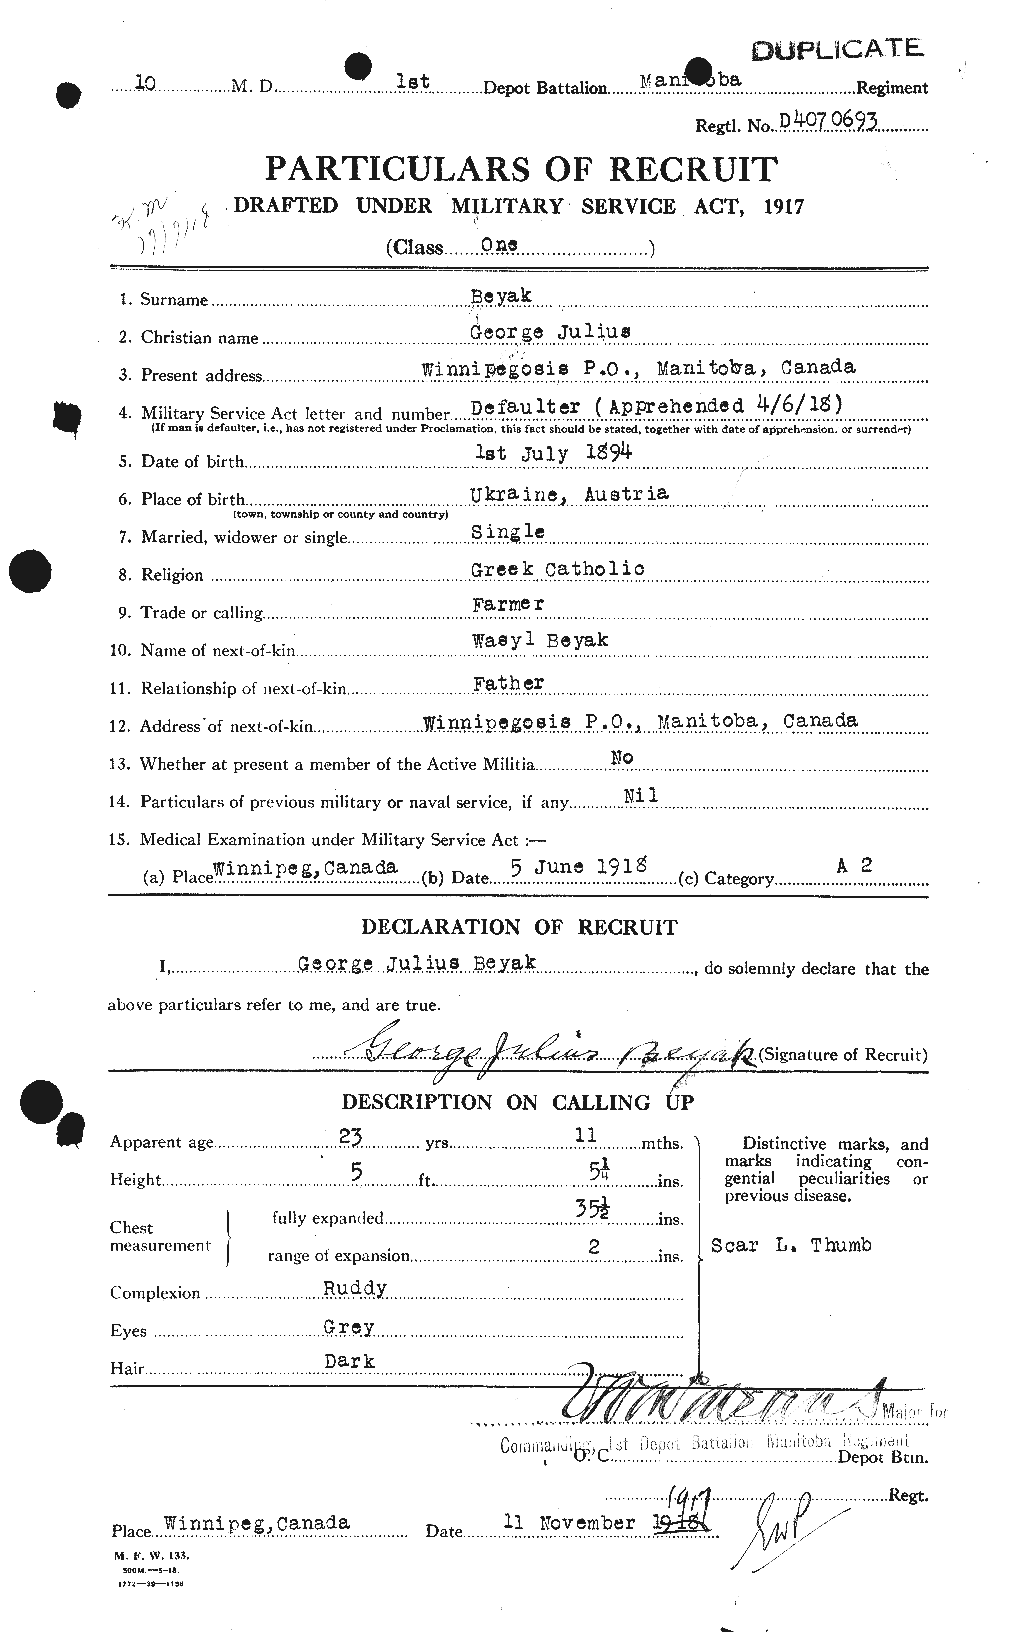 Personnel Records of the First World War - CEF 237487a